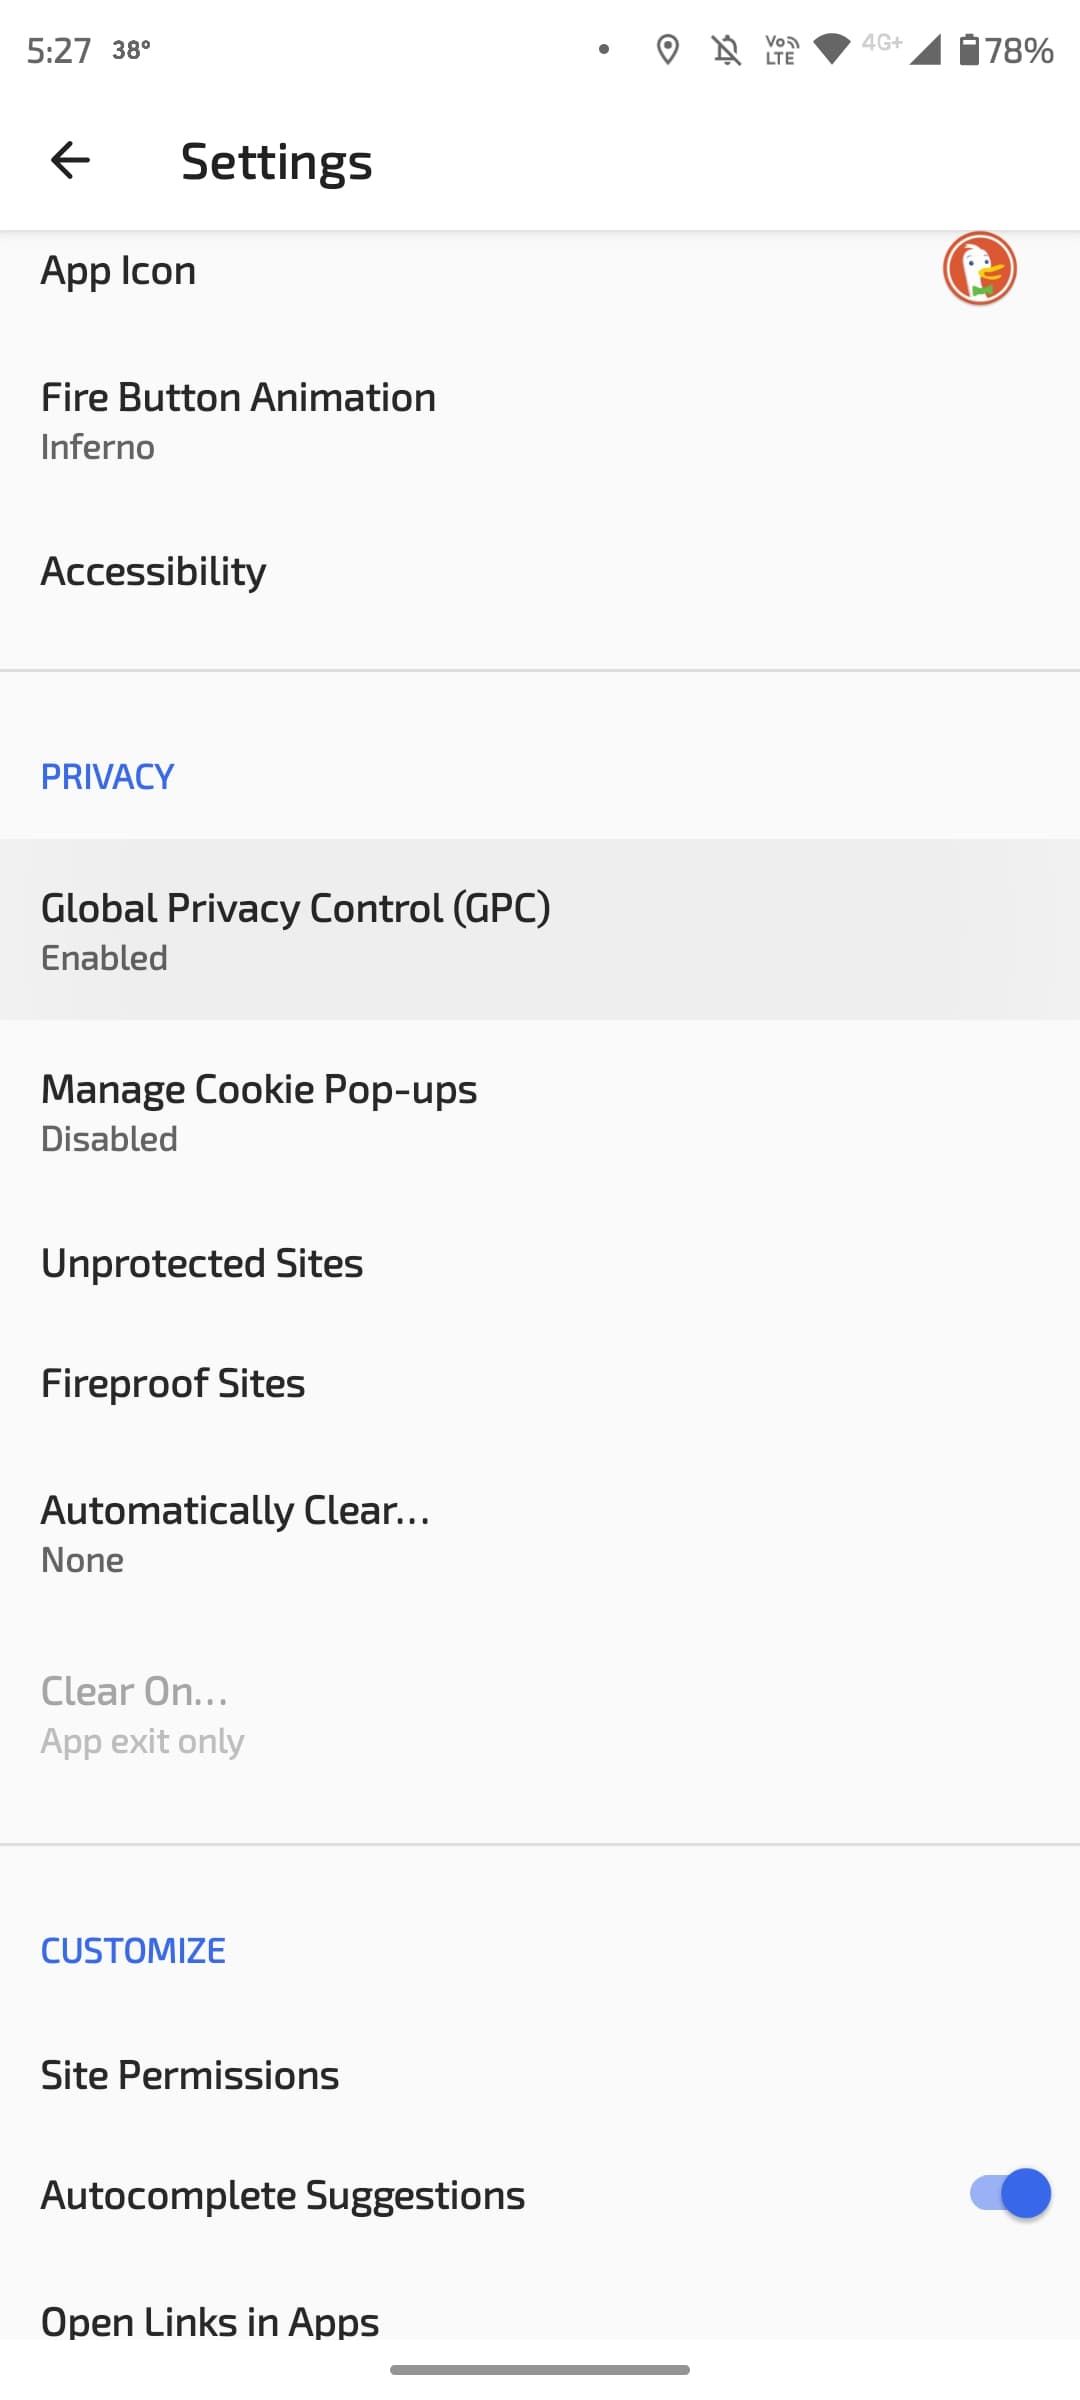 Settings page with list of options for DuckDuckGo